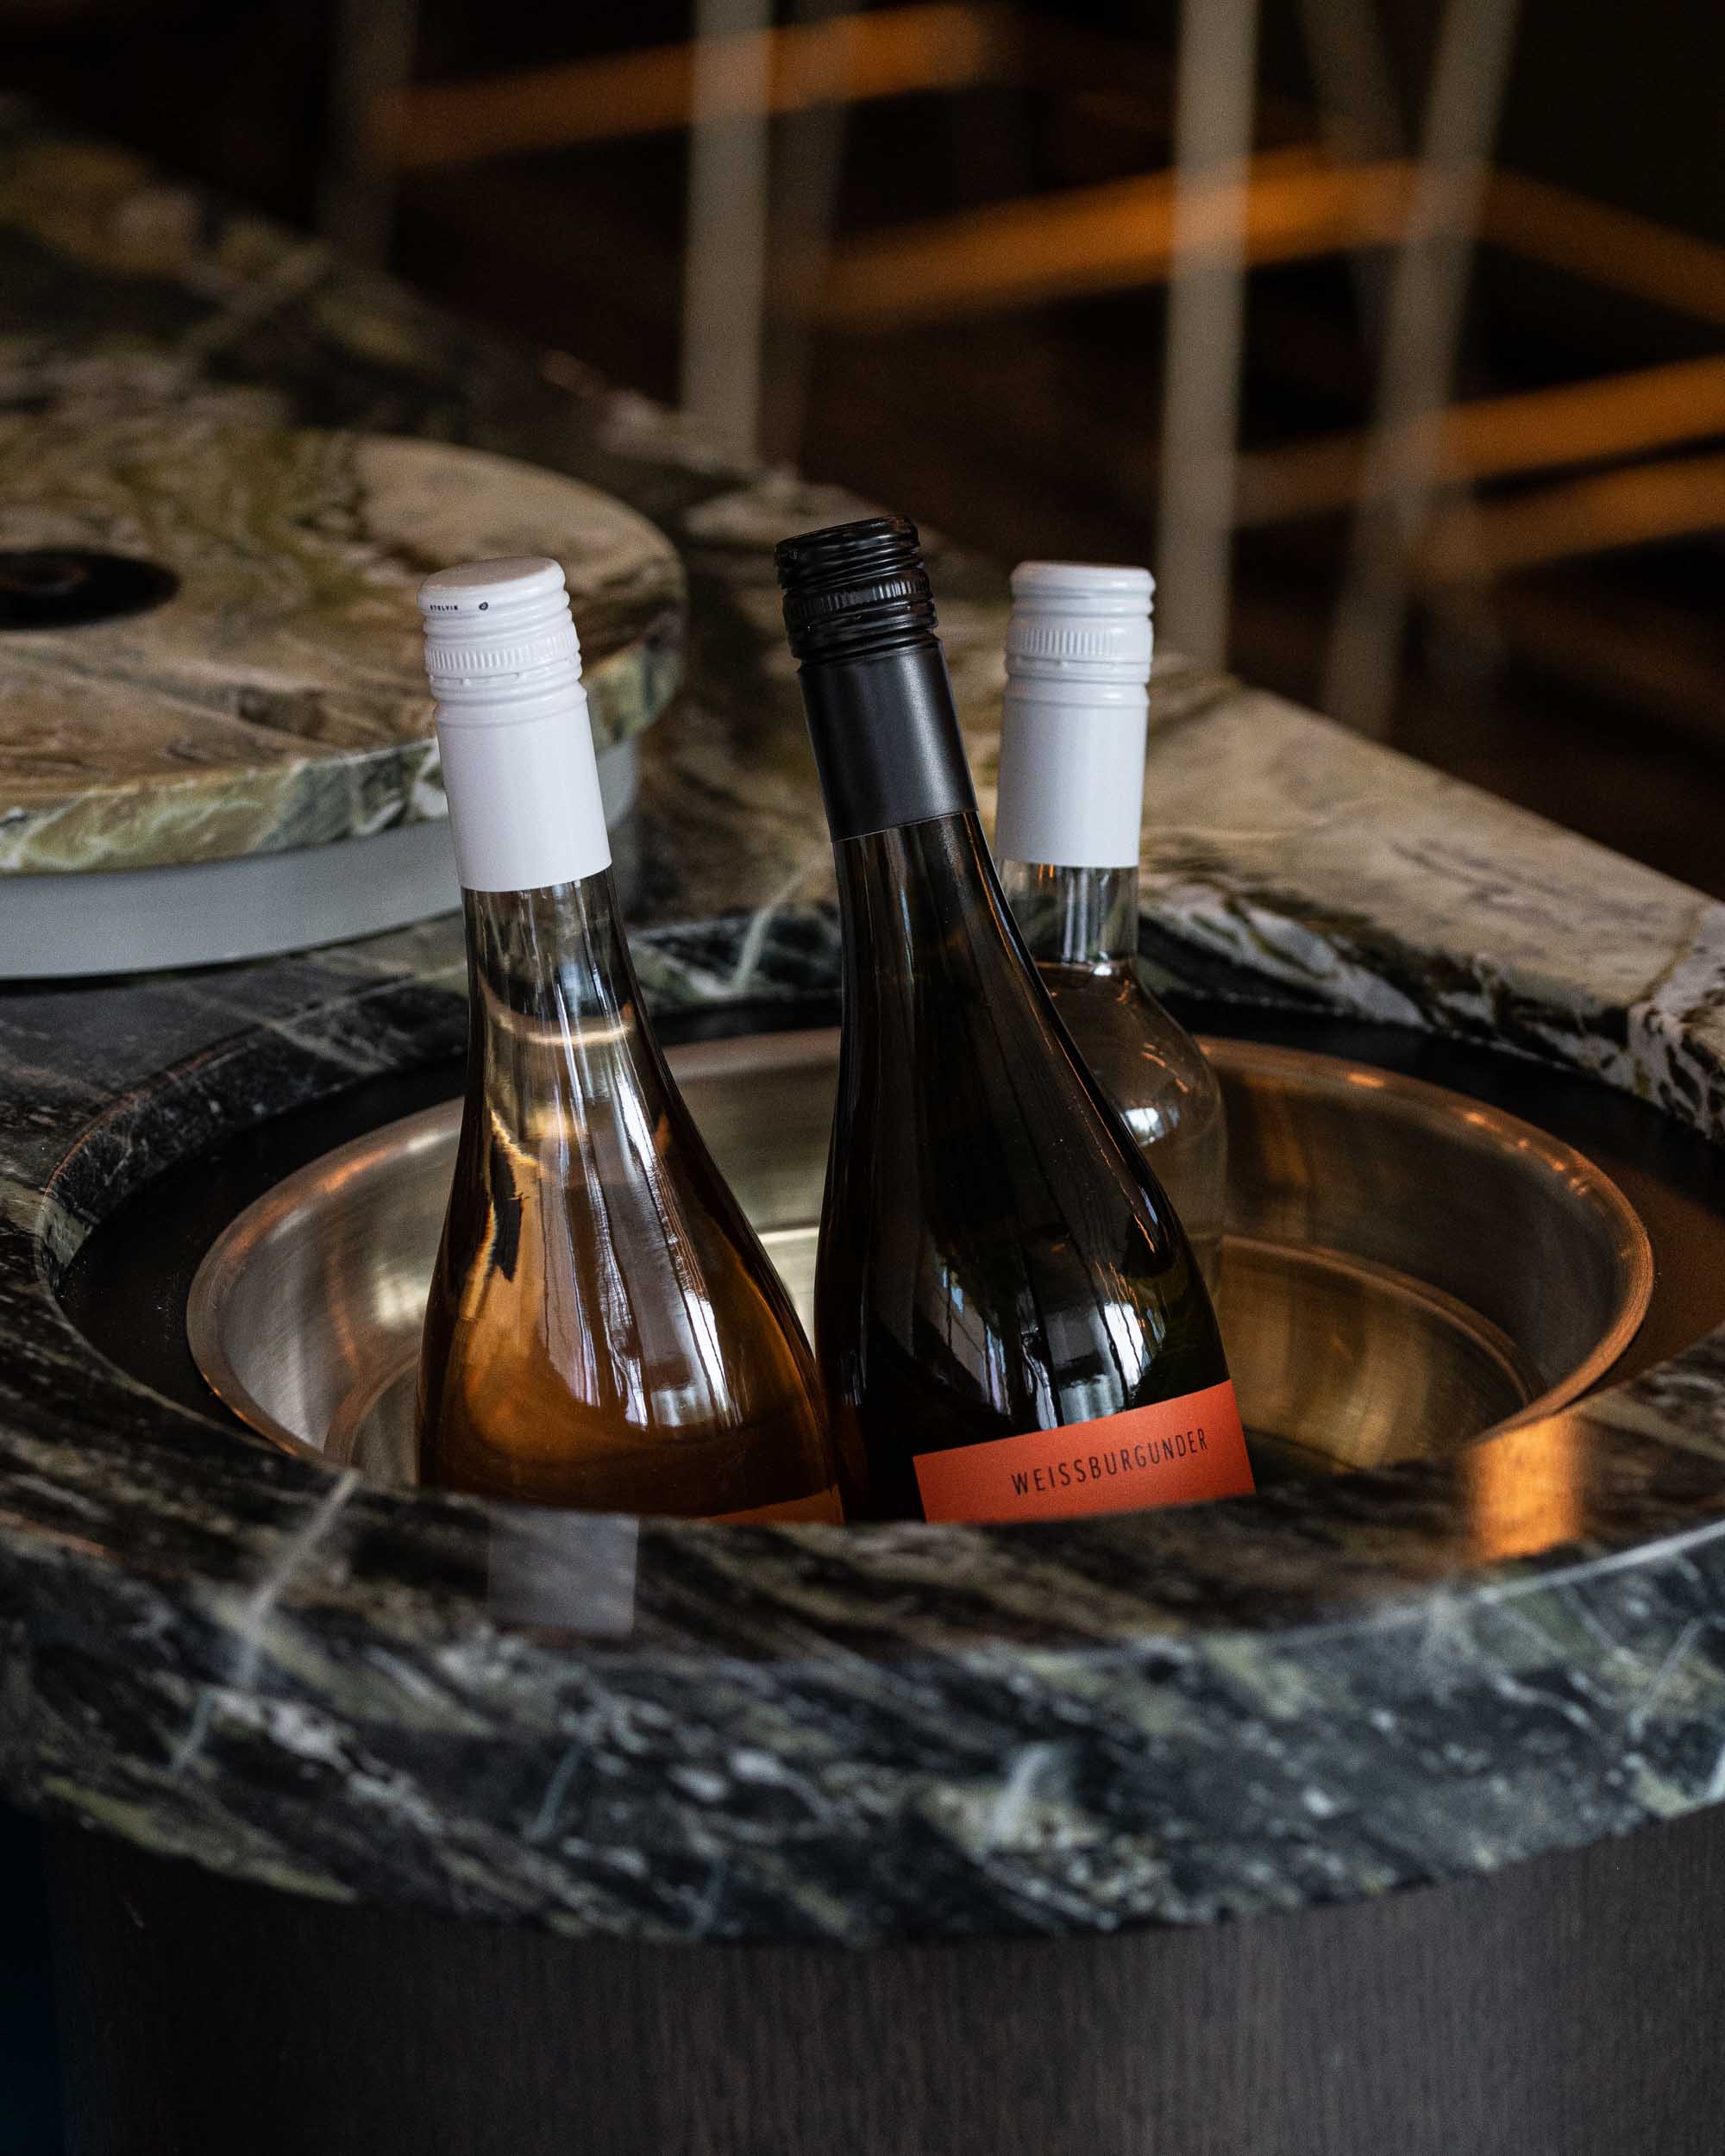 Three bottles of wine chill in a metal bucket within a dark stone bar top